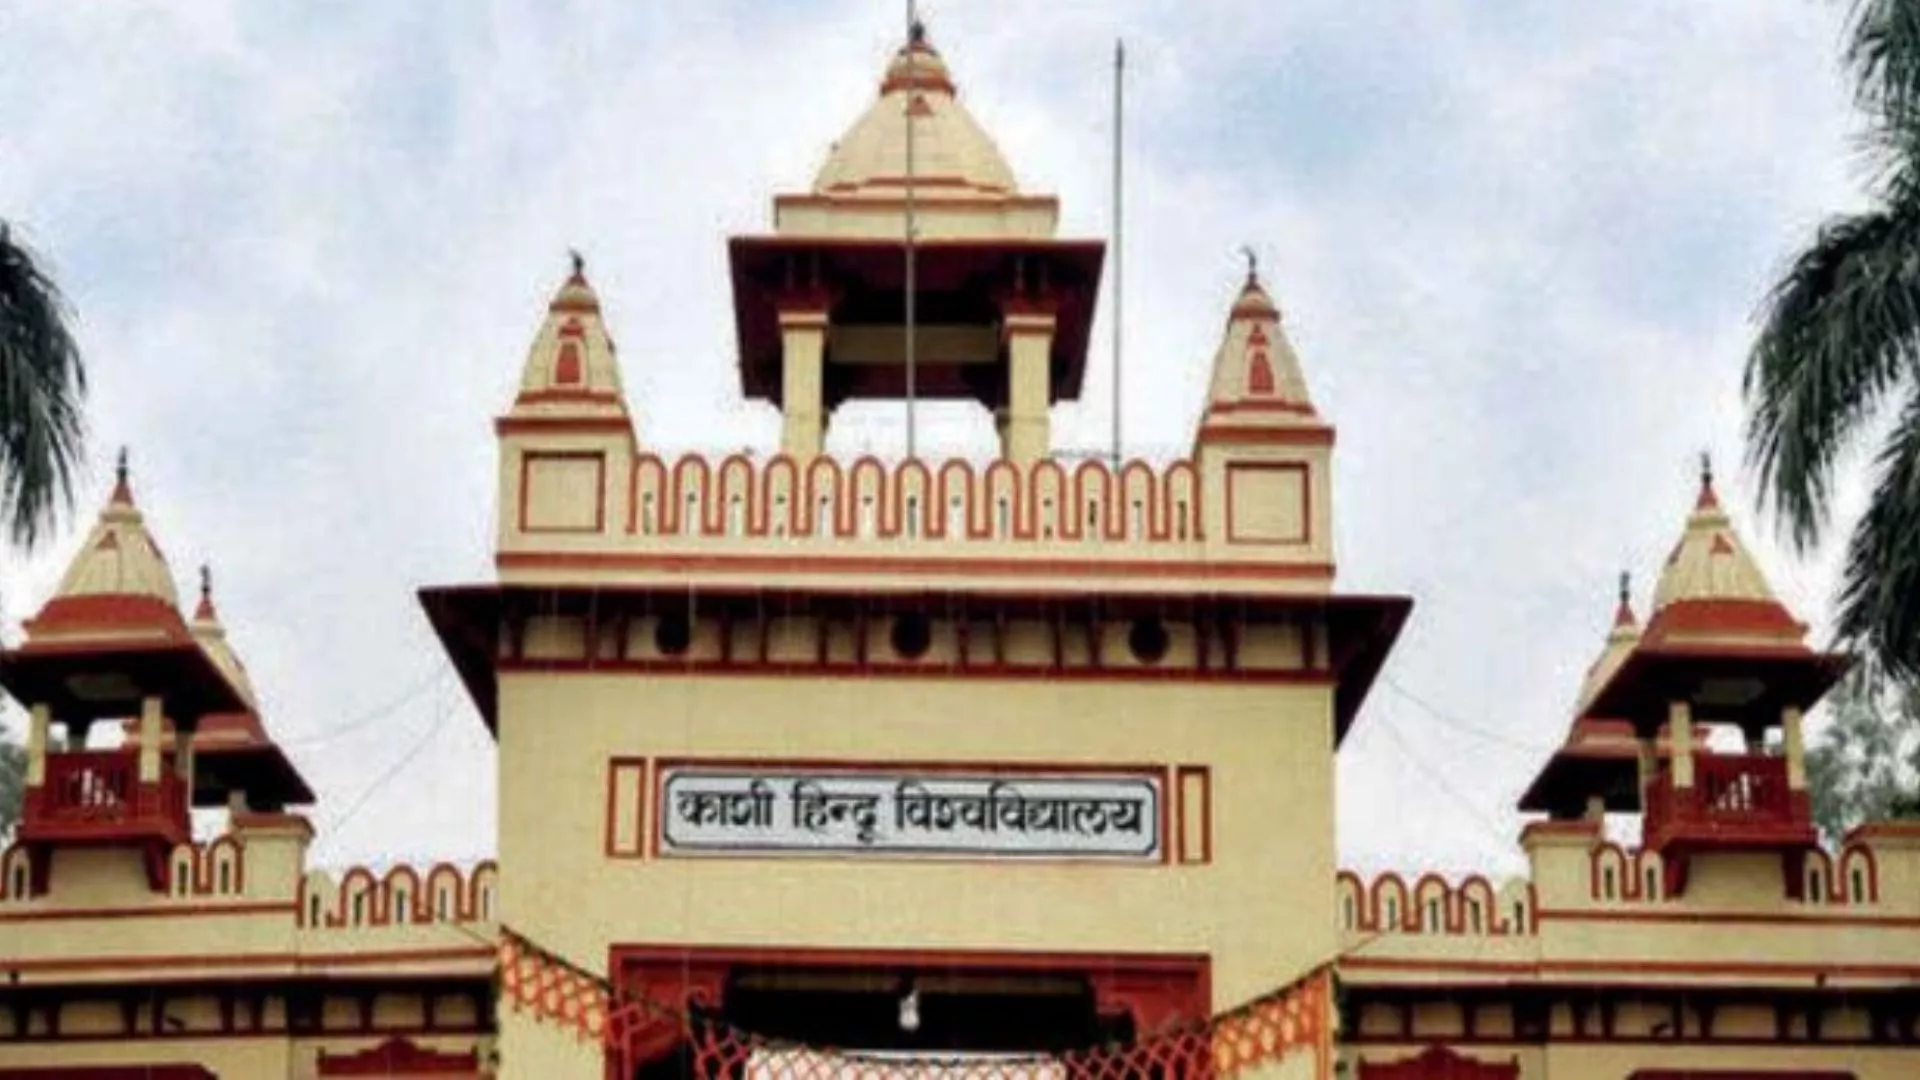 Banaras Hindu University invites applications For JRF, Get monthly salary of Rs.36,000